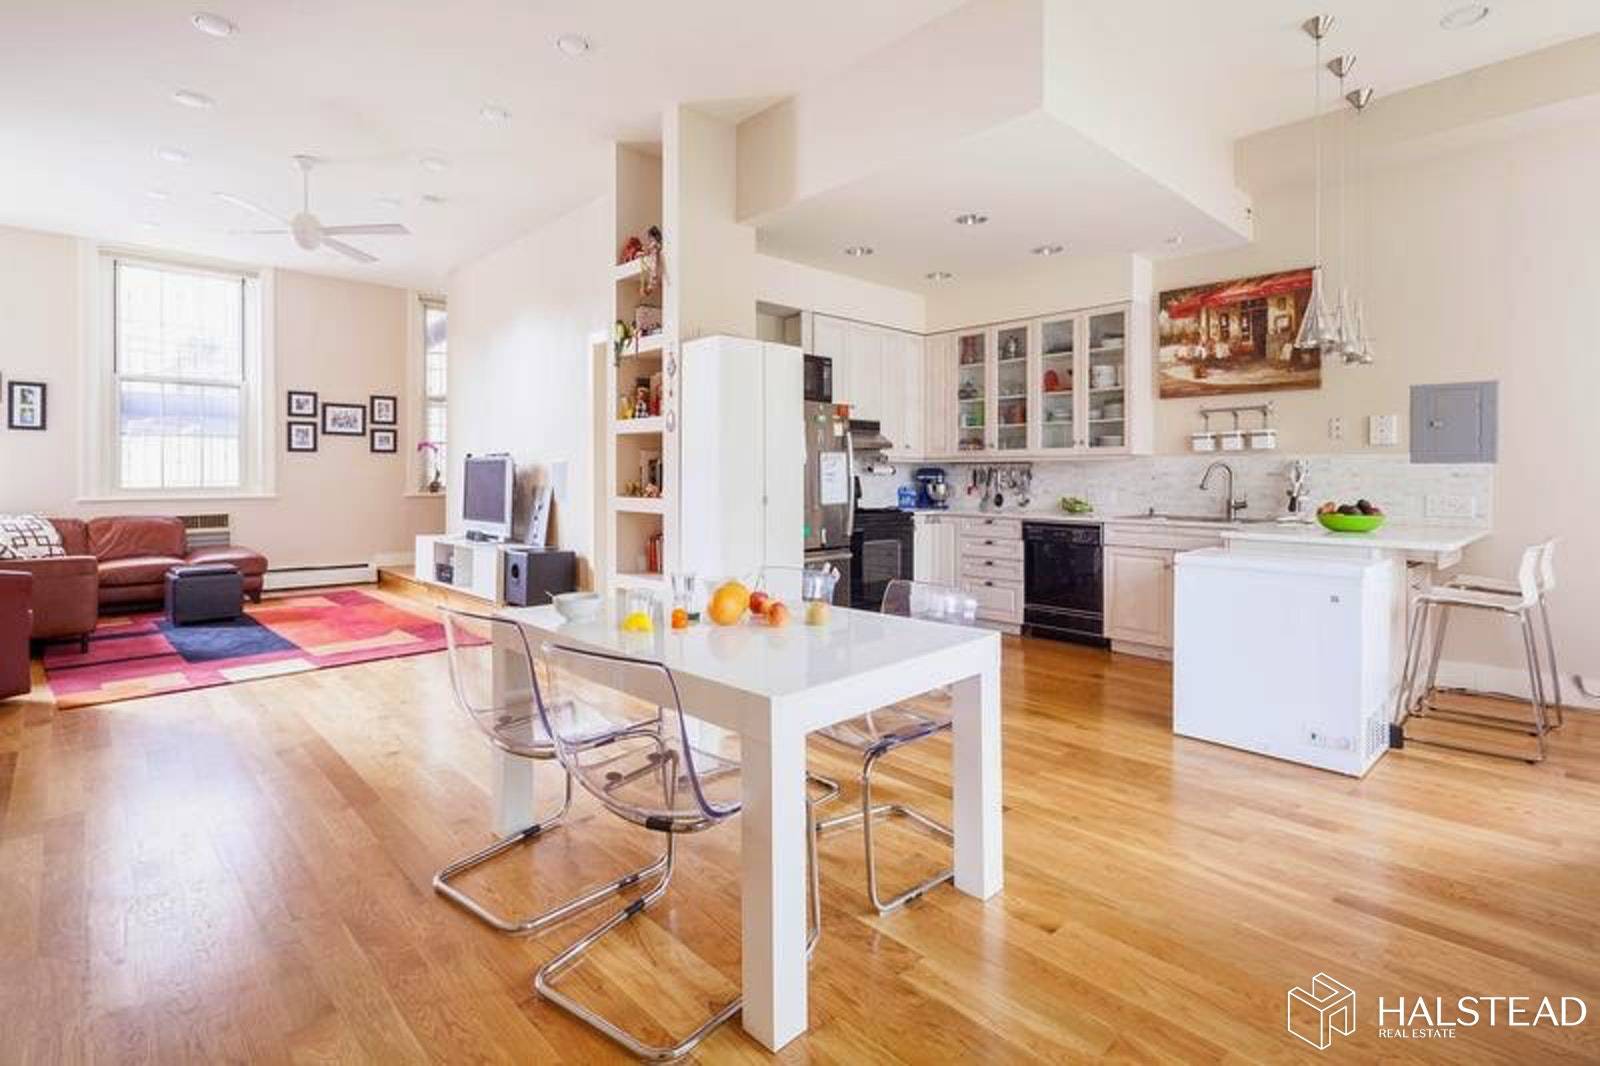 Located in gorgeous Brooklyn Heights, this 1375 square foot, architect designed loft has three bedrooms and two full bathrooms and the purchase includes a PARKING SPACE in the gated adjacent ...